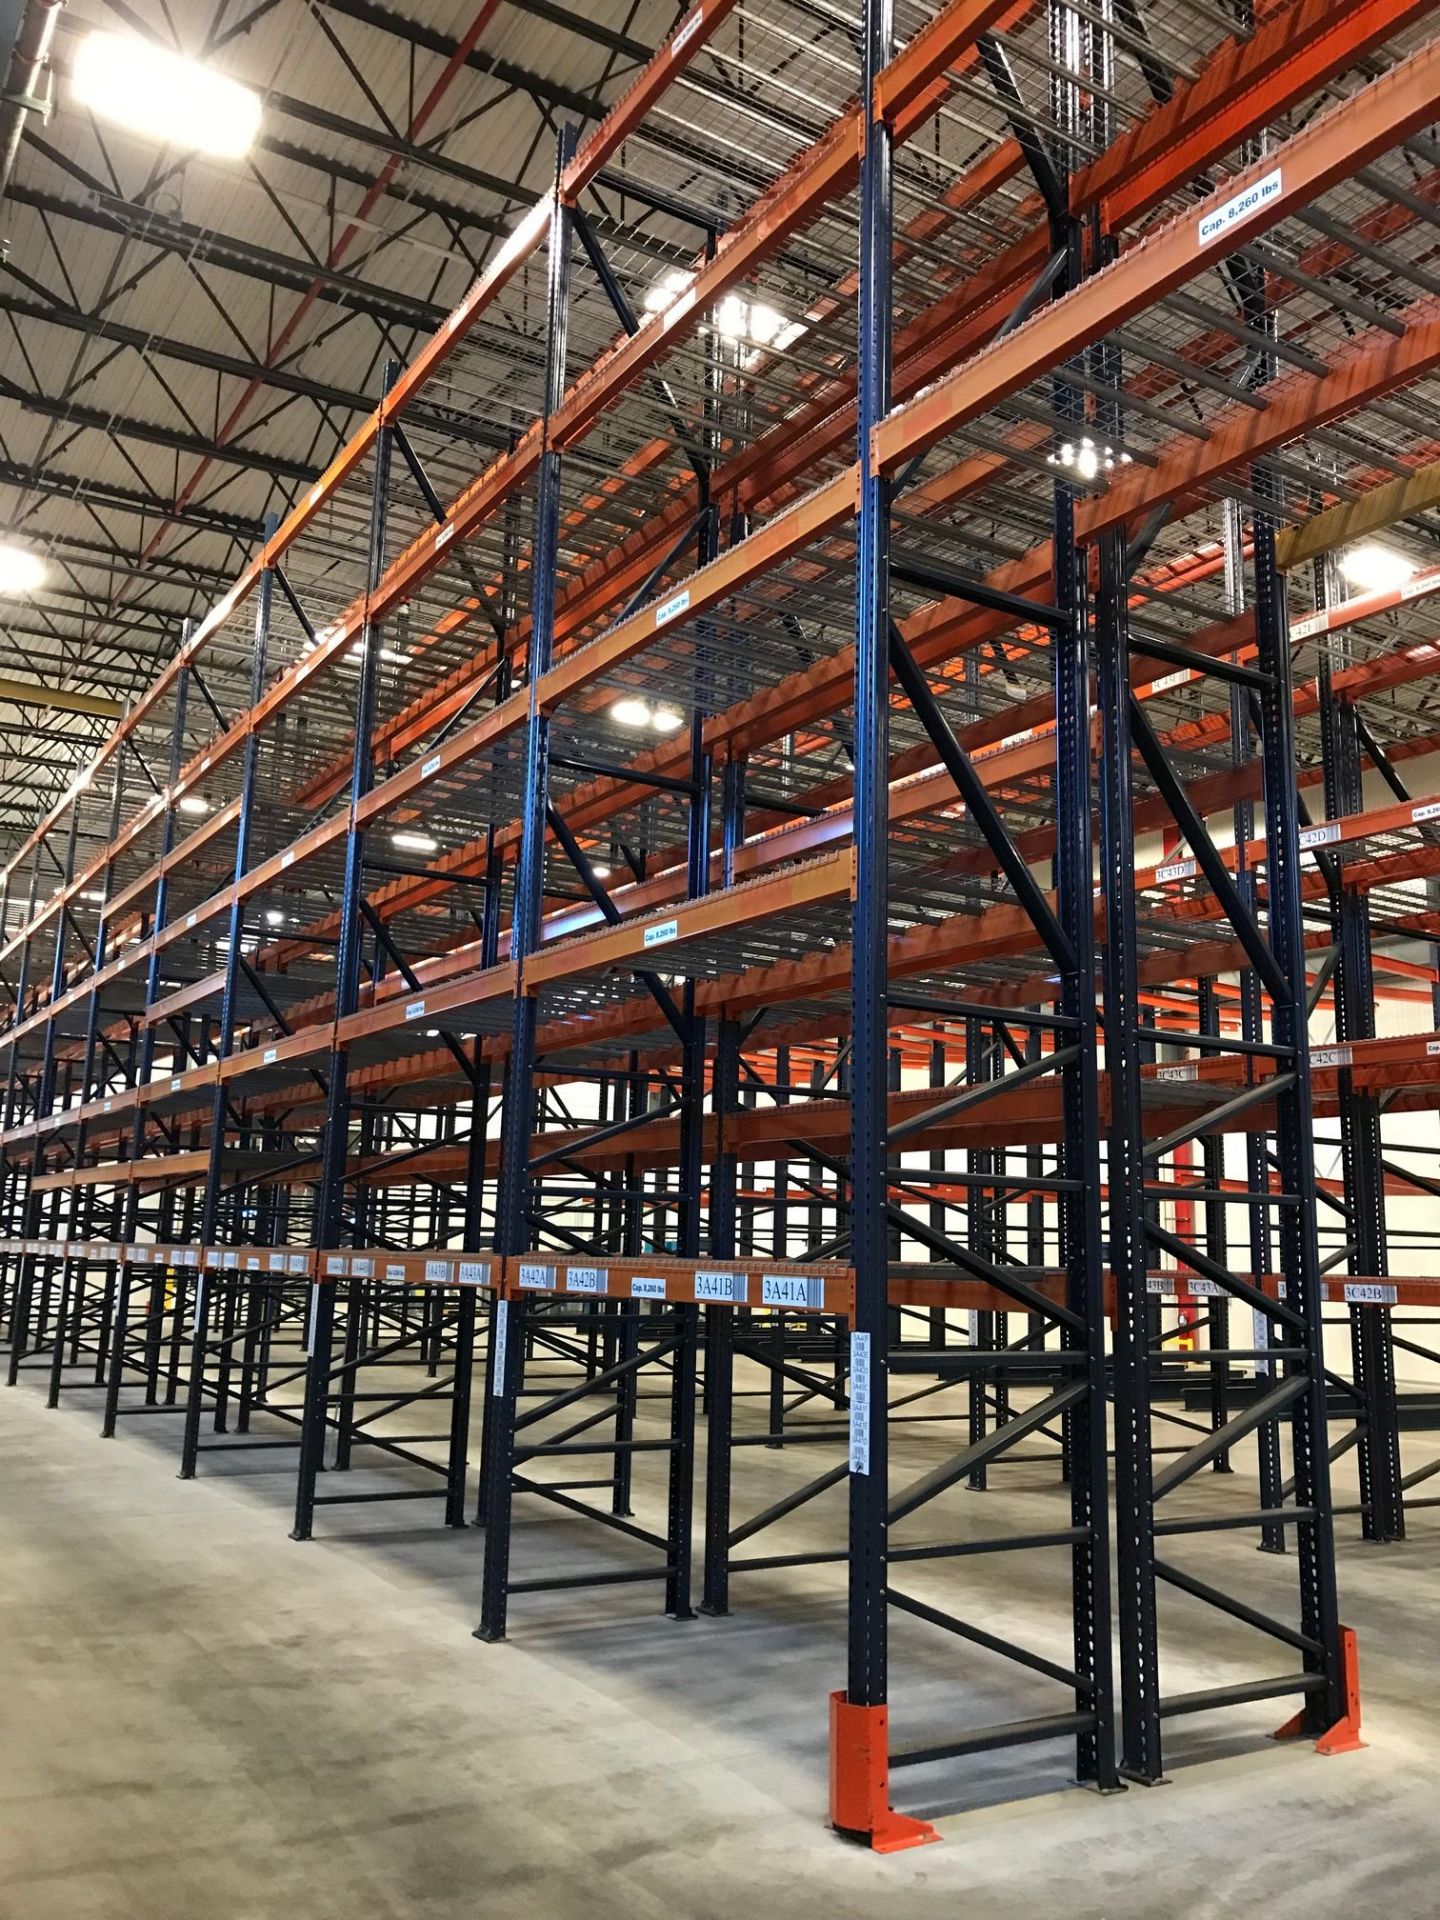 SECTIONS 108" LONG X 42" WIDE X 288" HIGH TEARDROP TYPE ADJUSTABLE BEAM PALLET RACK WITH WIRE - Image 8 of 9